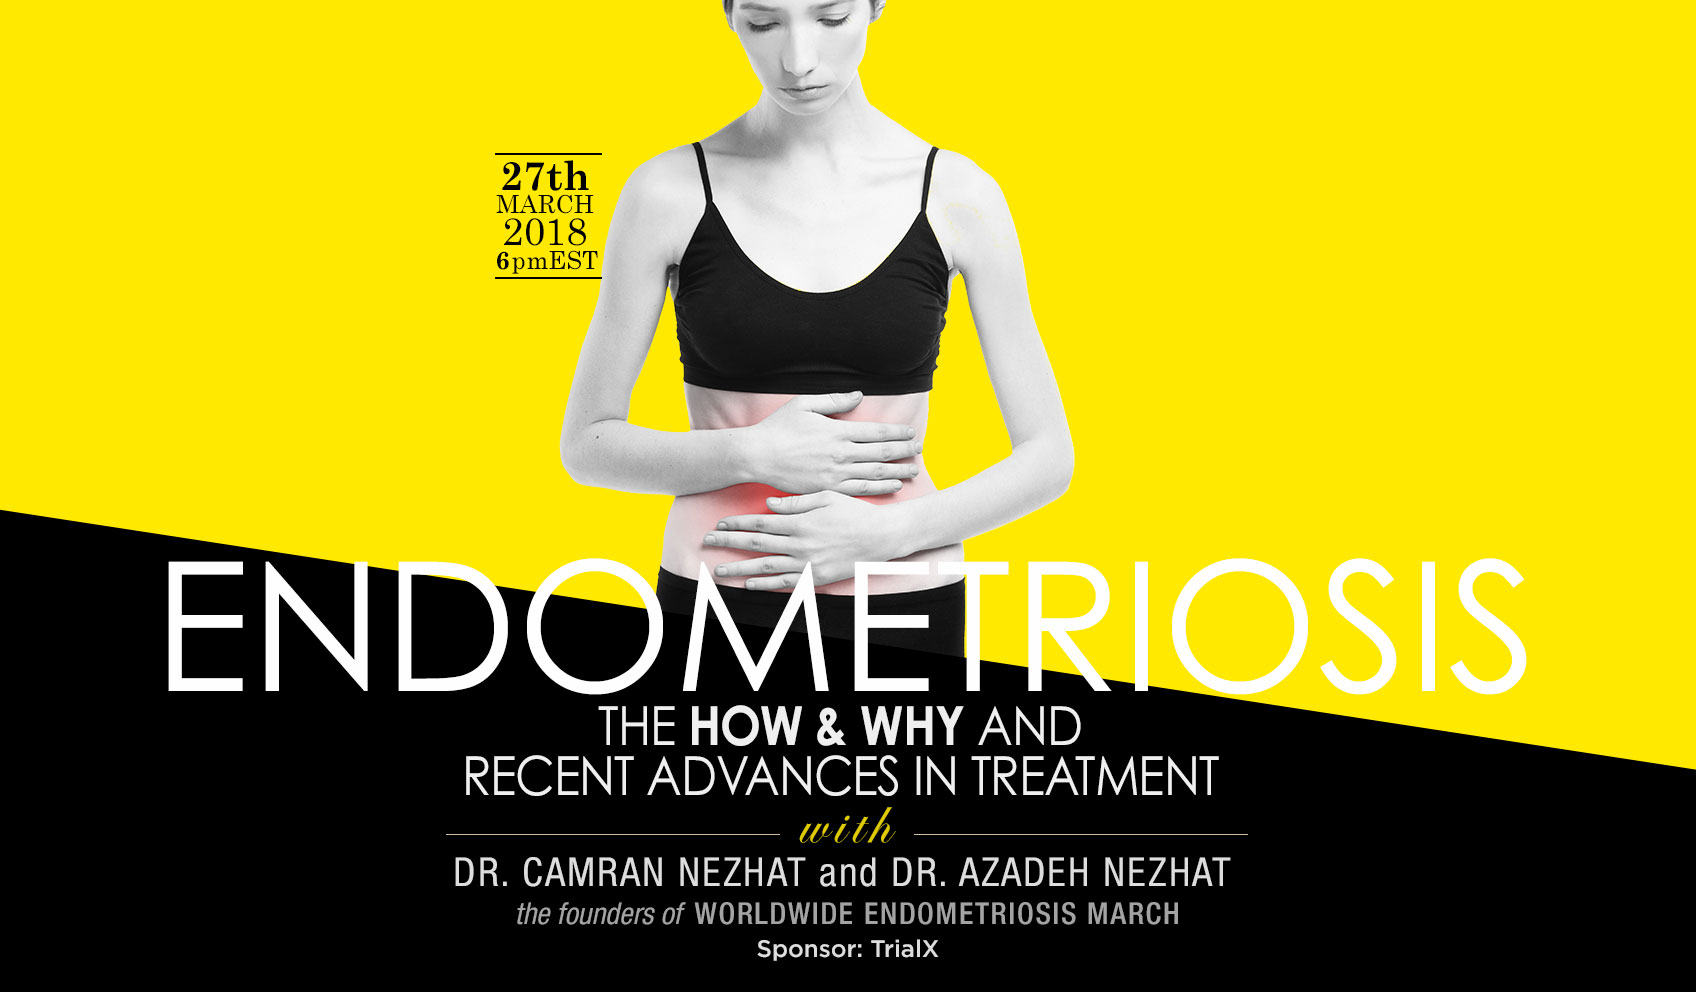 Endometriosis – The How & Why and Recent Advances in Treatment with Dr Camran Nezhat